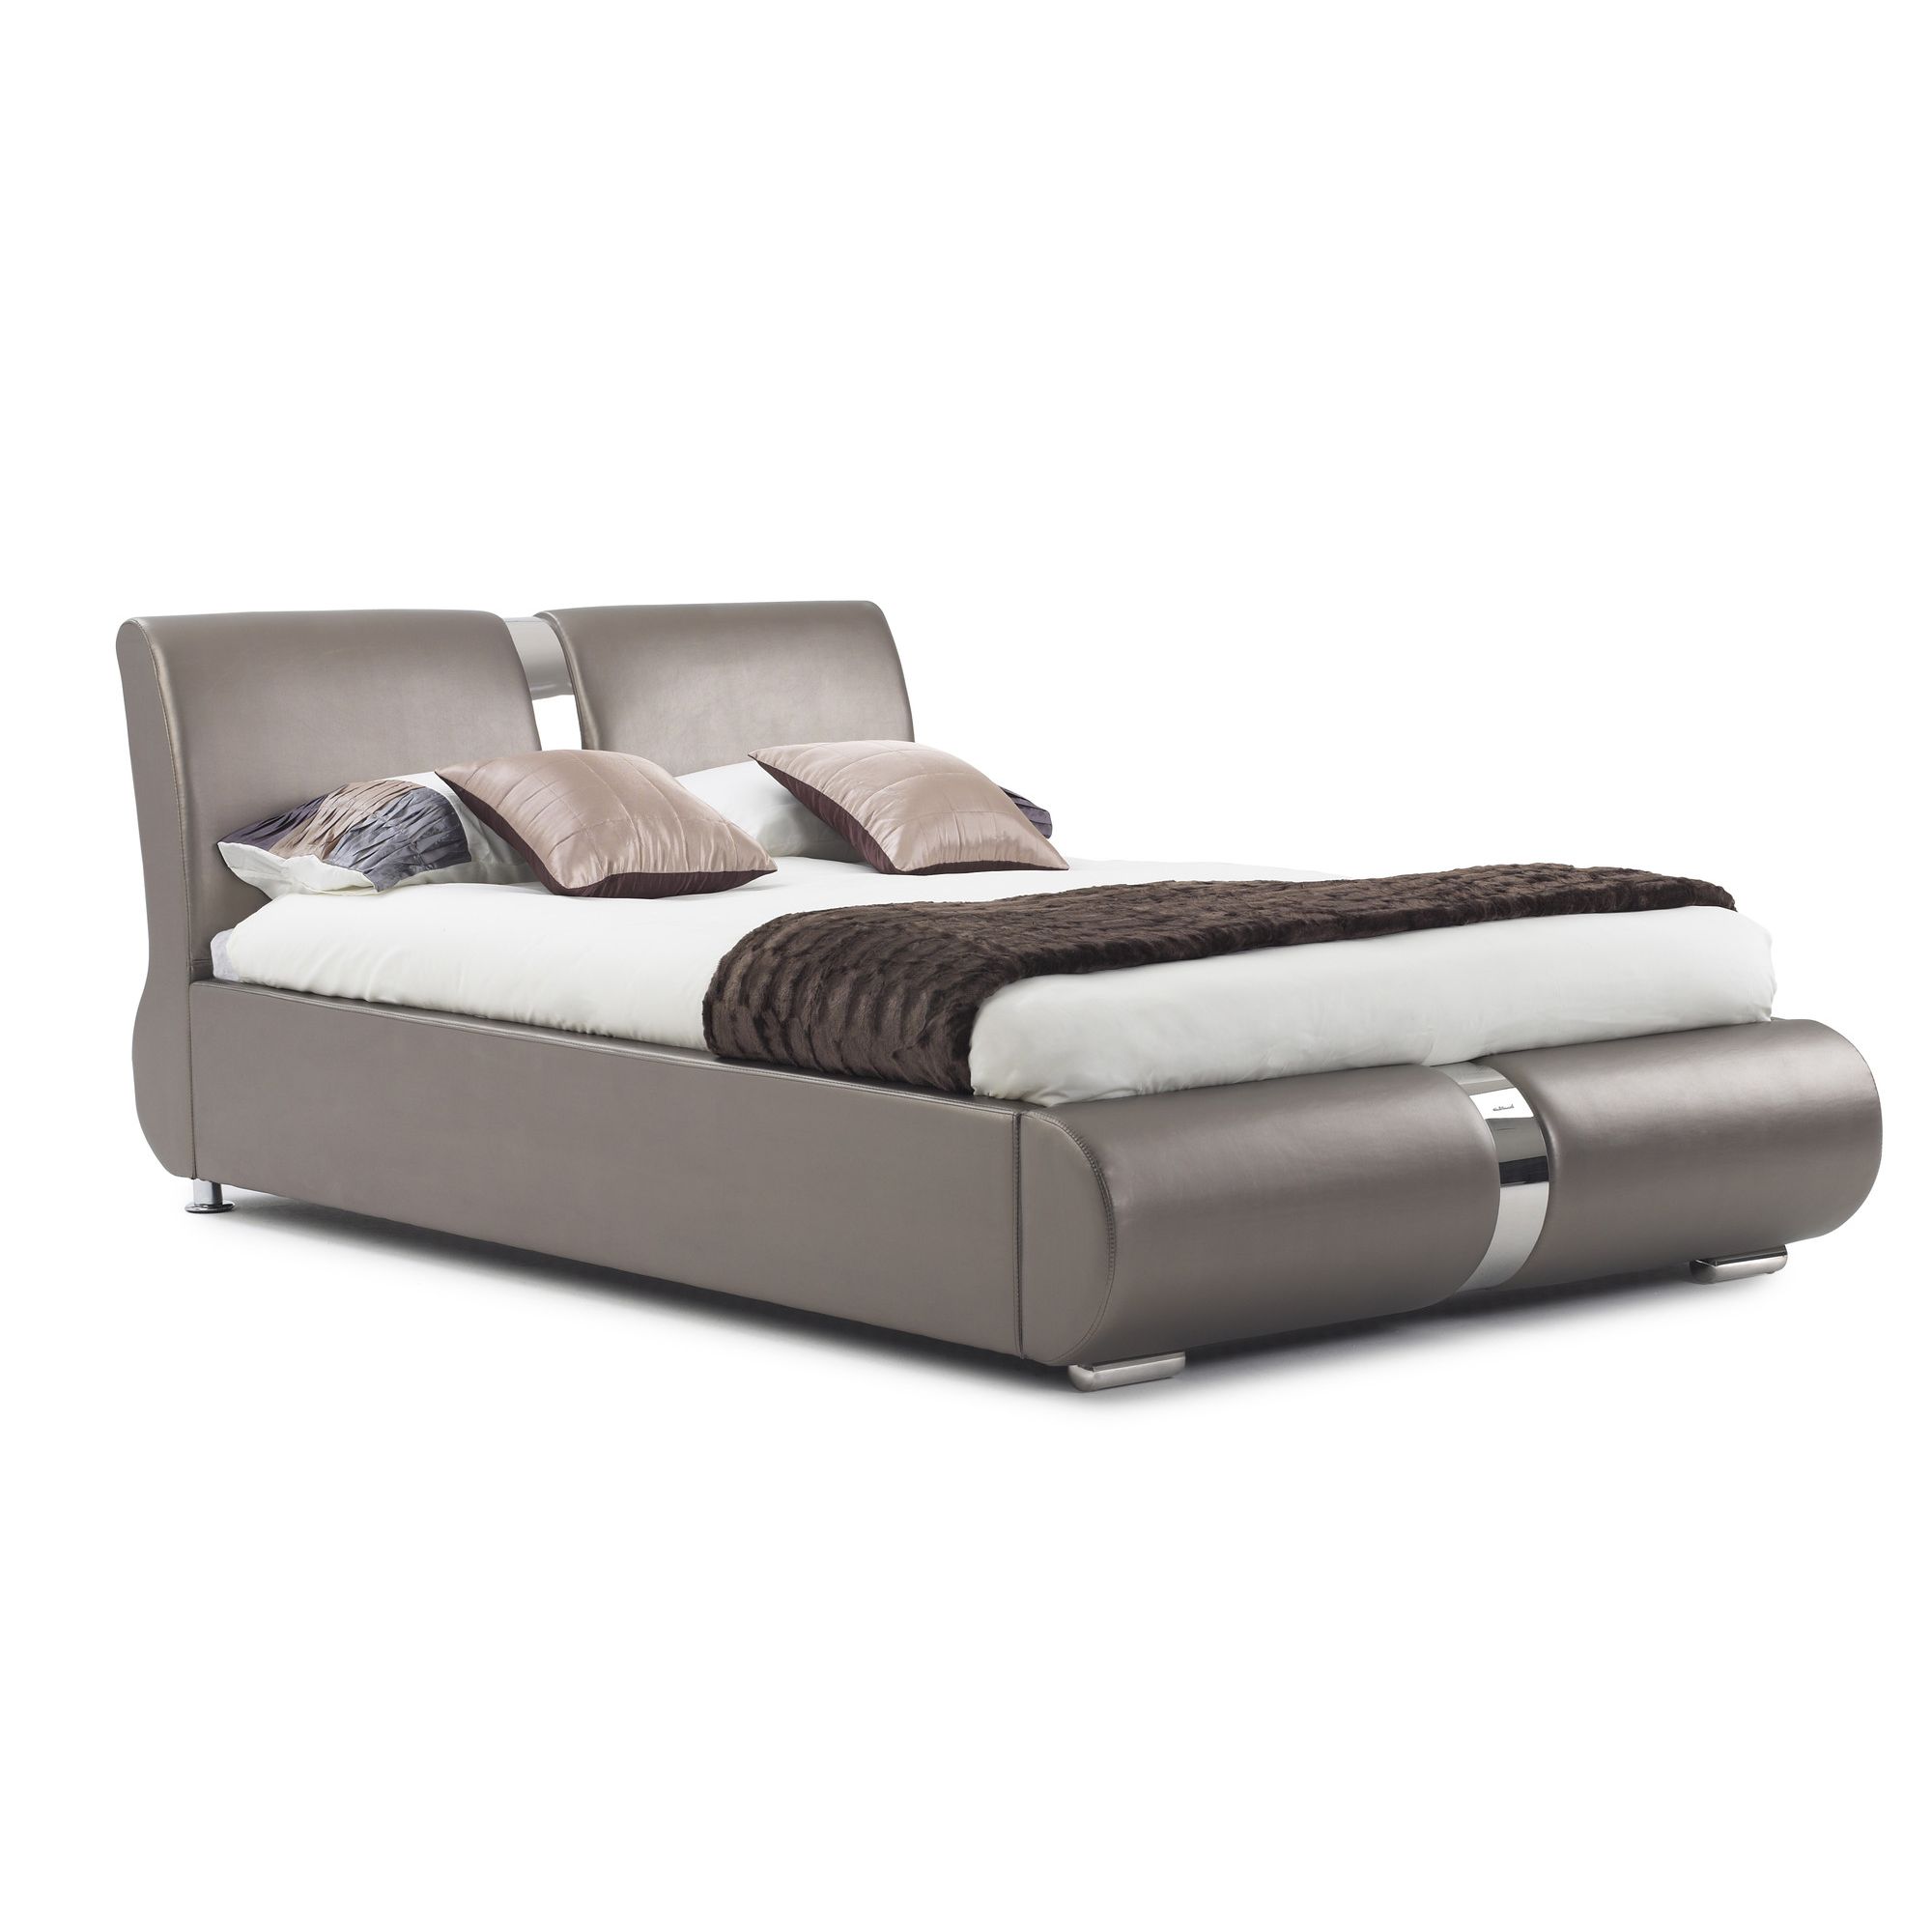 Frank Bosworth Milan Leather Bed - Gold - King at Tesco Direct